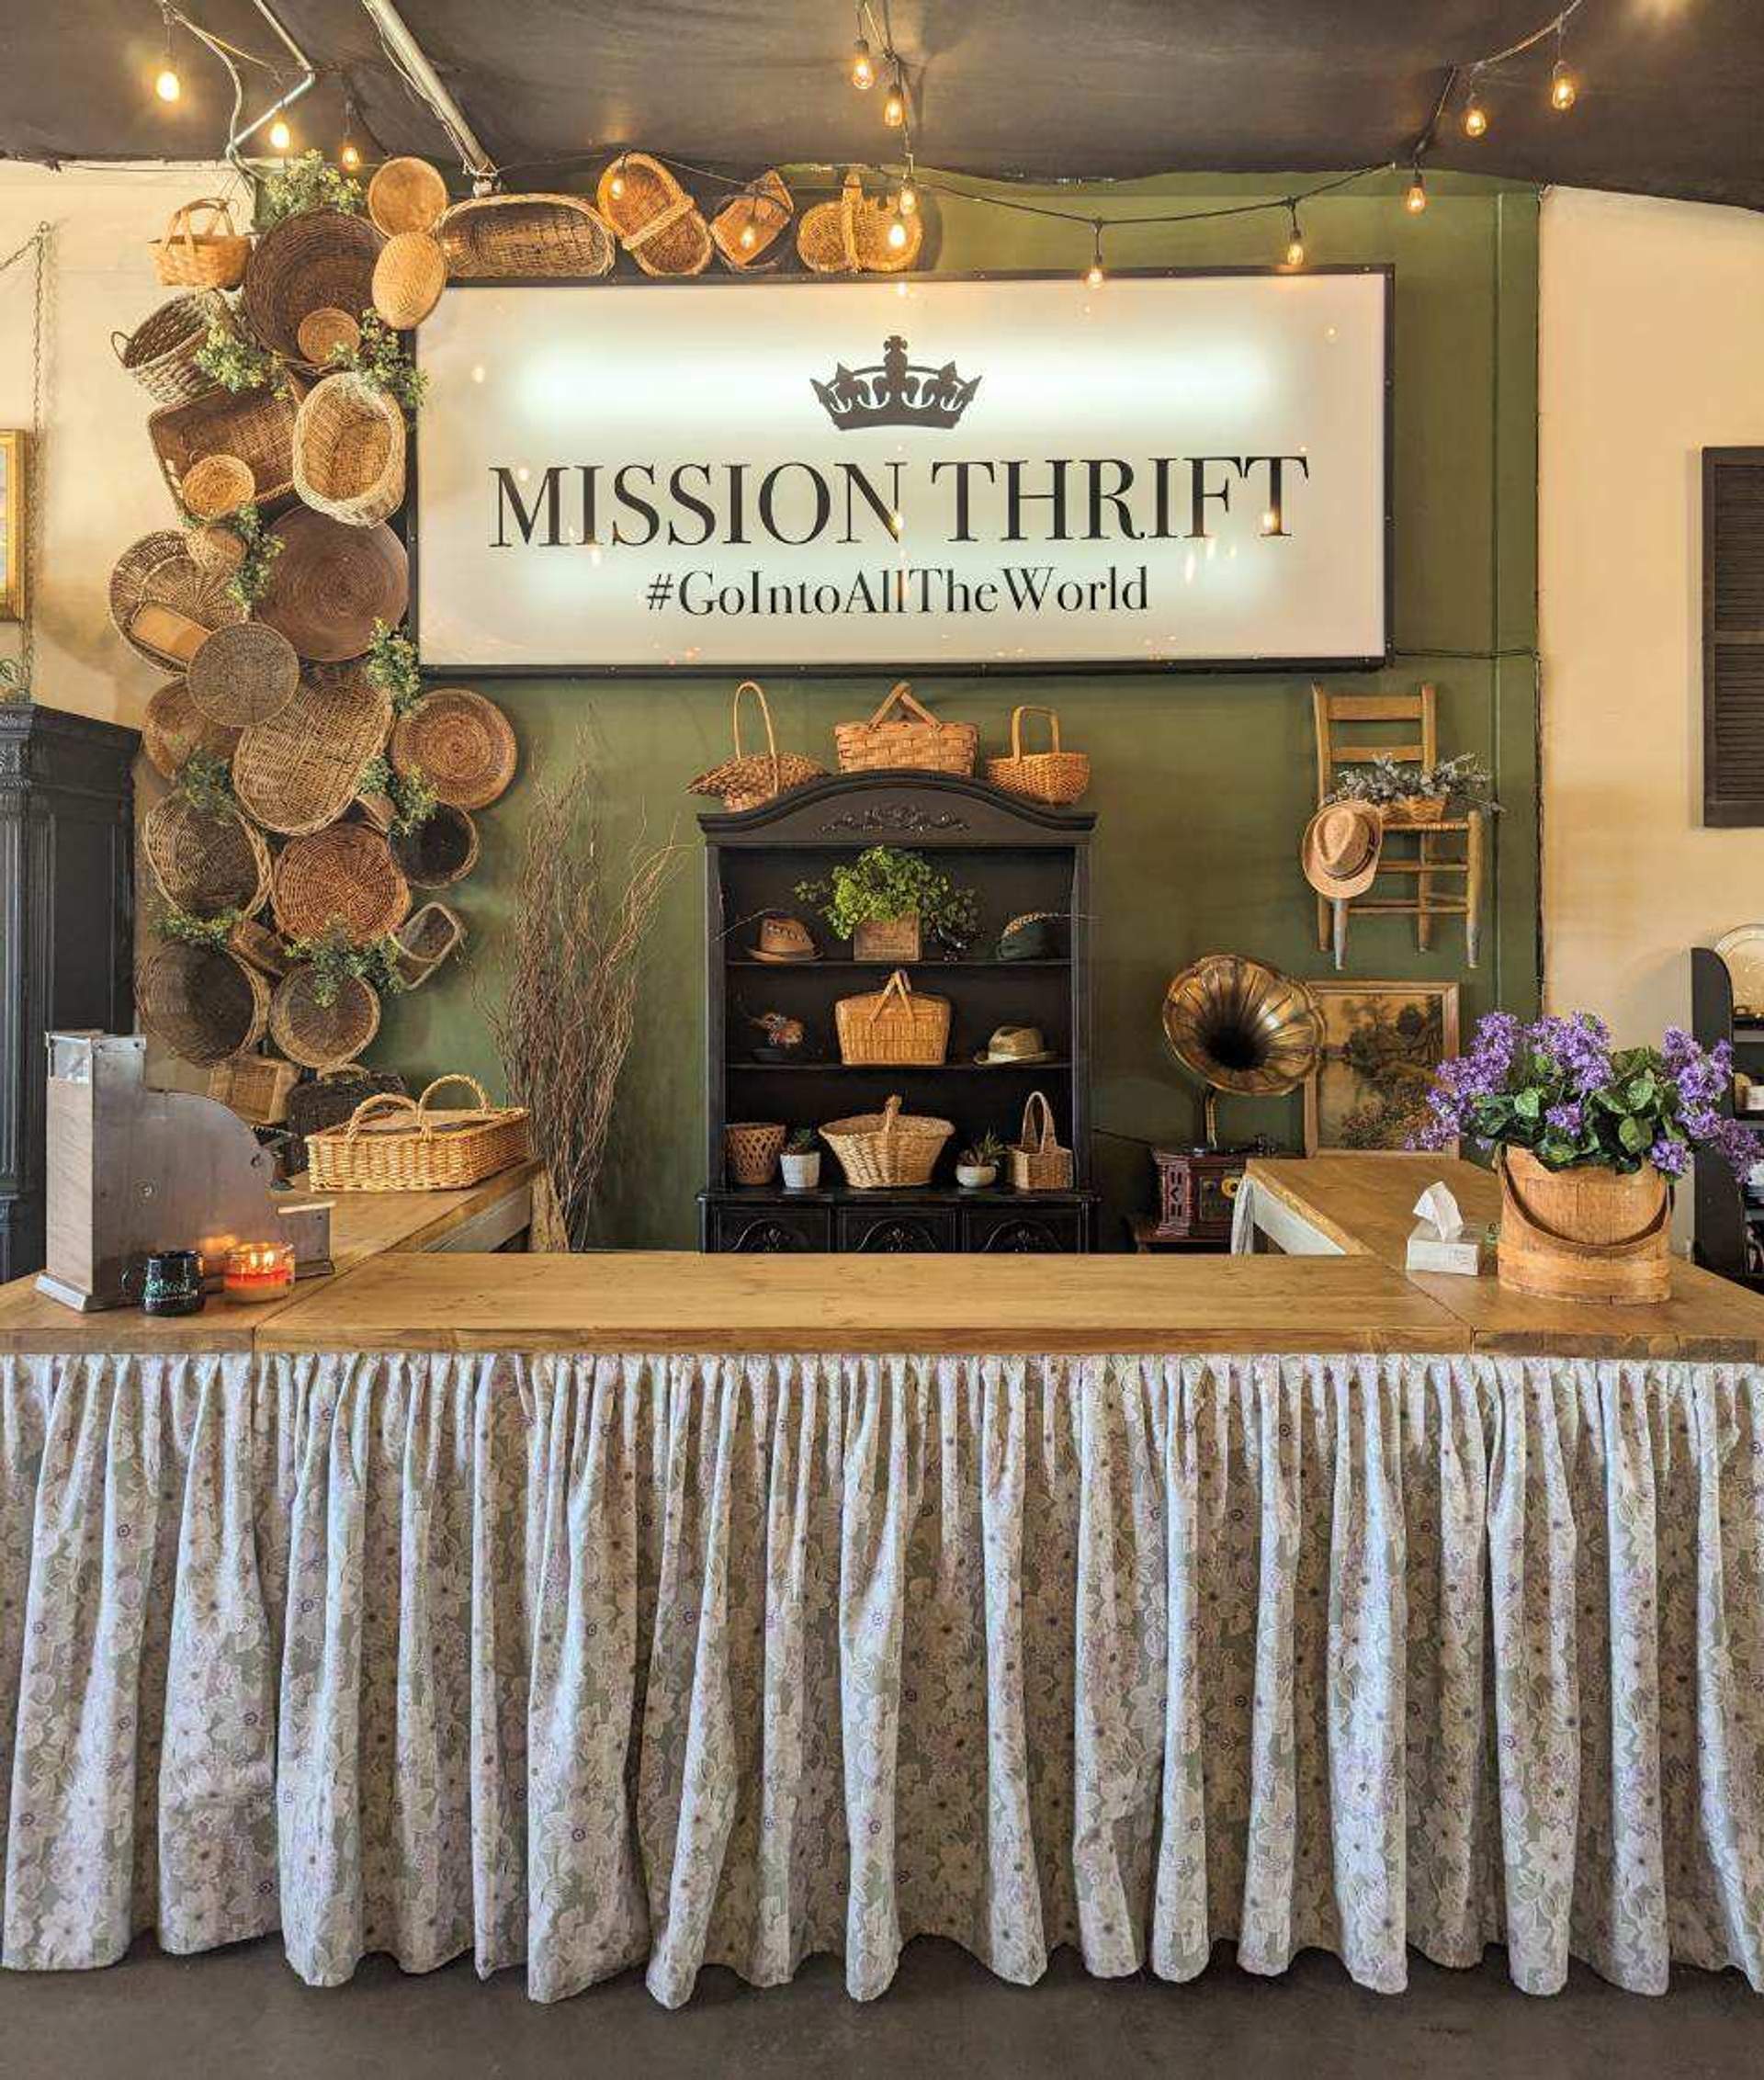 Mission Thrift's background photo